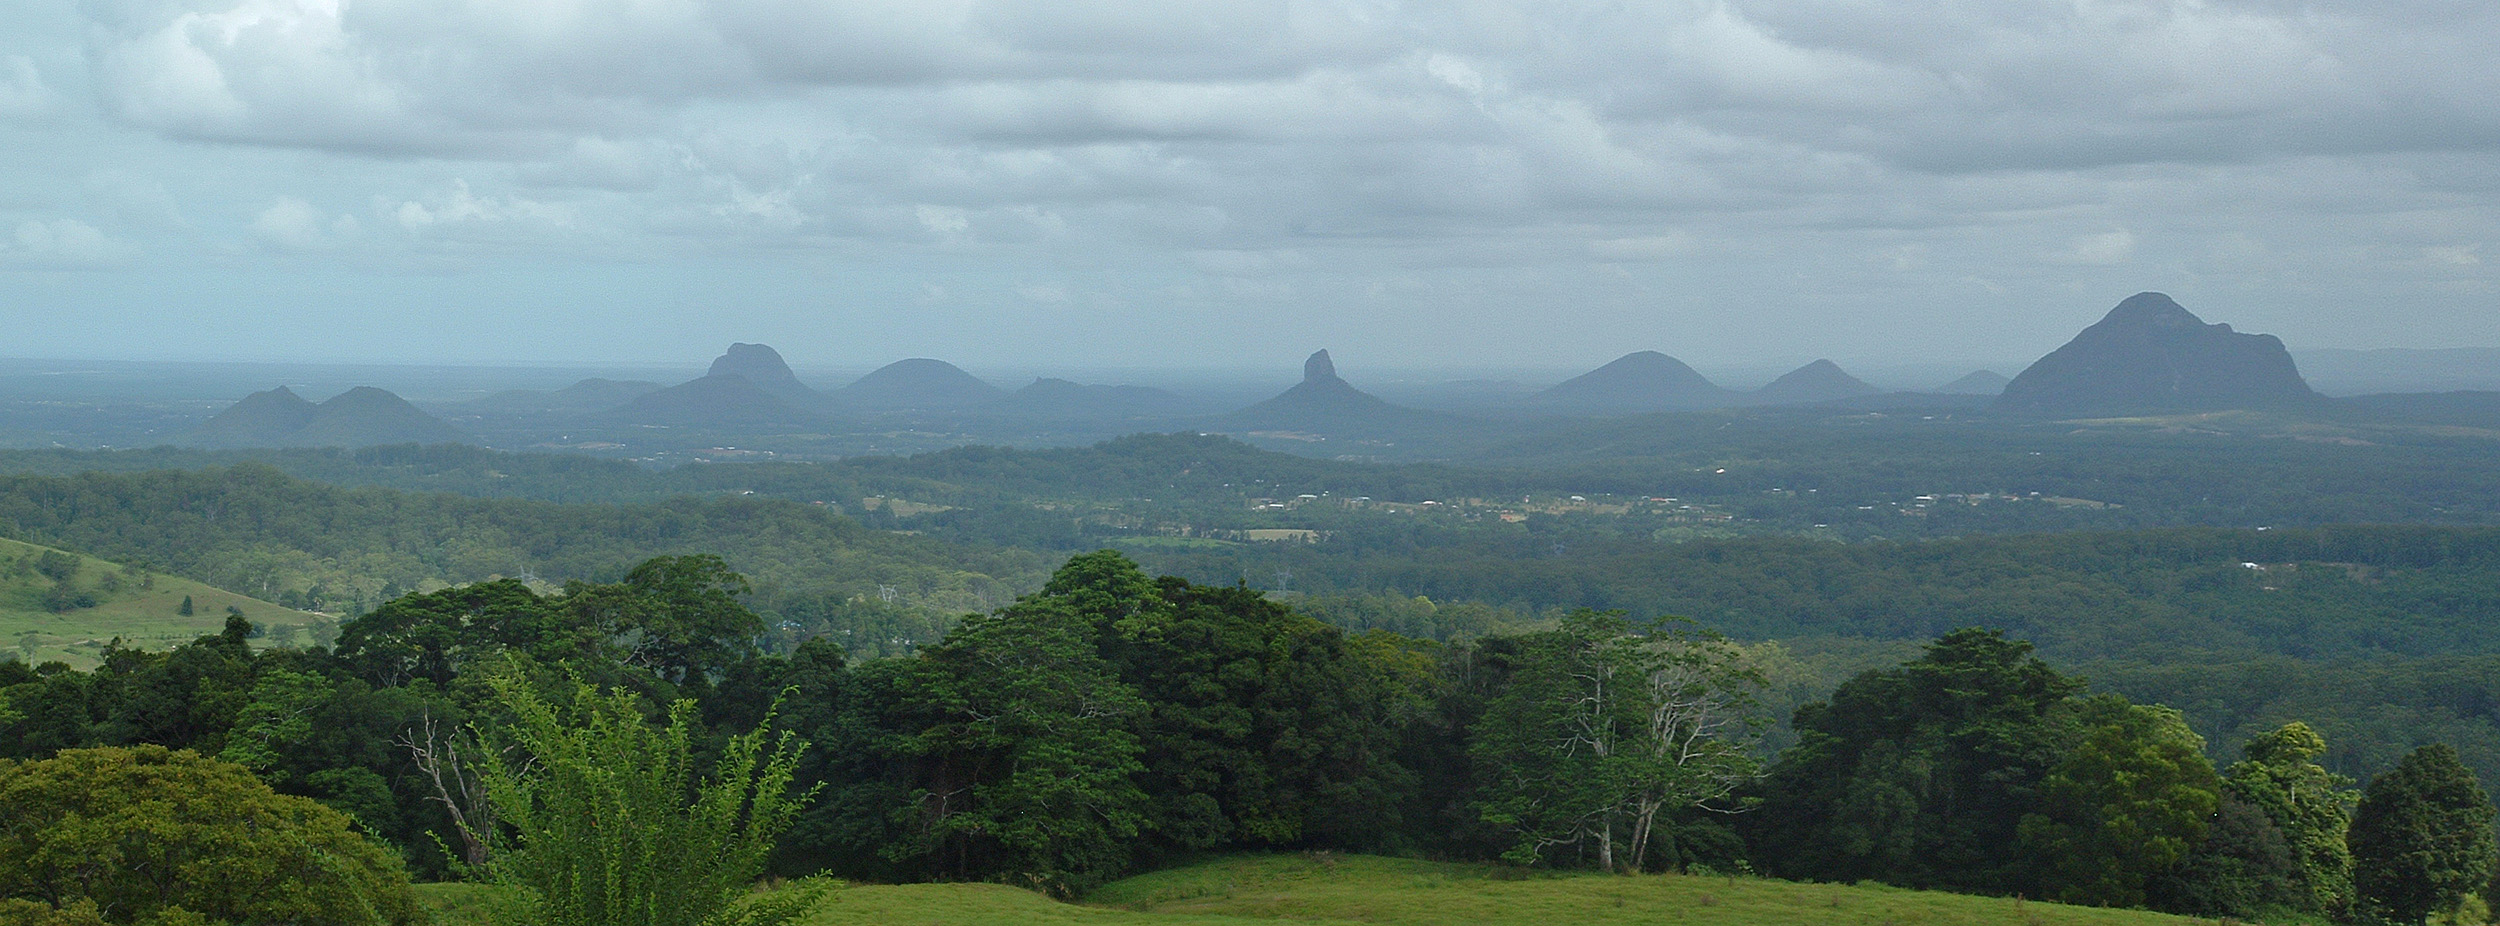 Glasshouse Mountains svg #18, Download drawings